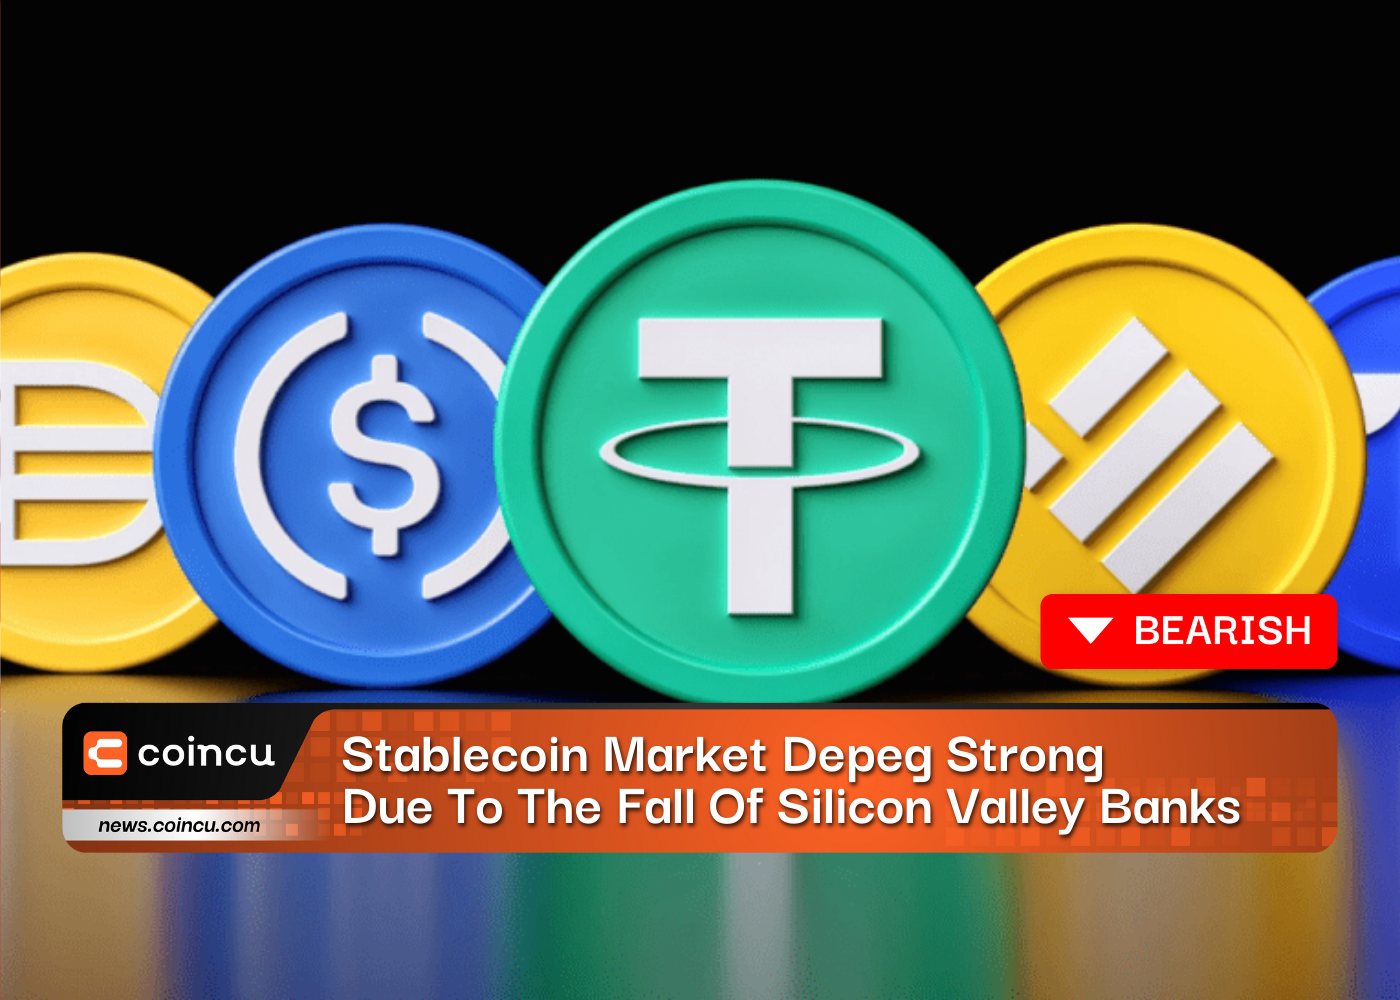 Stablecoin Market Depeg Strong Due To The Fall Of Silicon Valley Banks